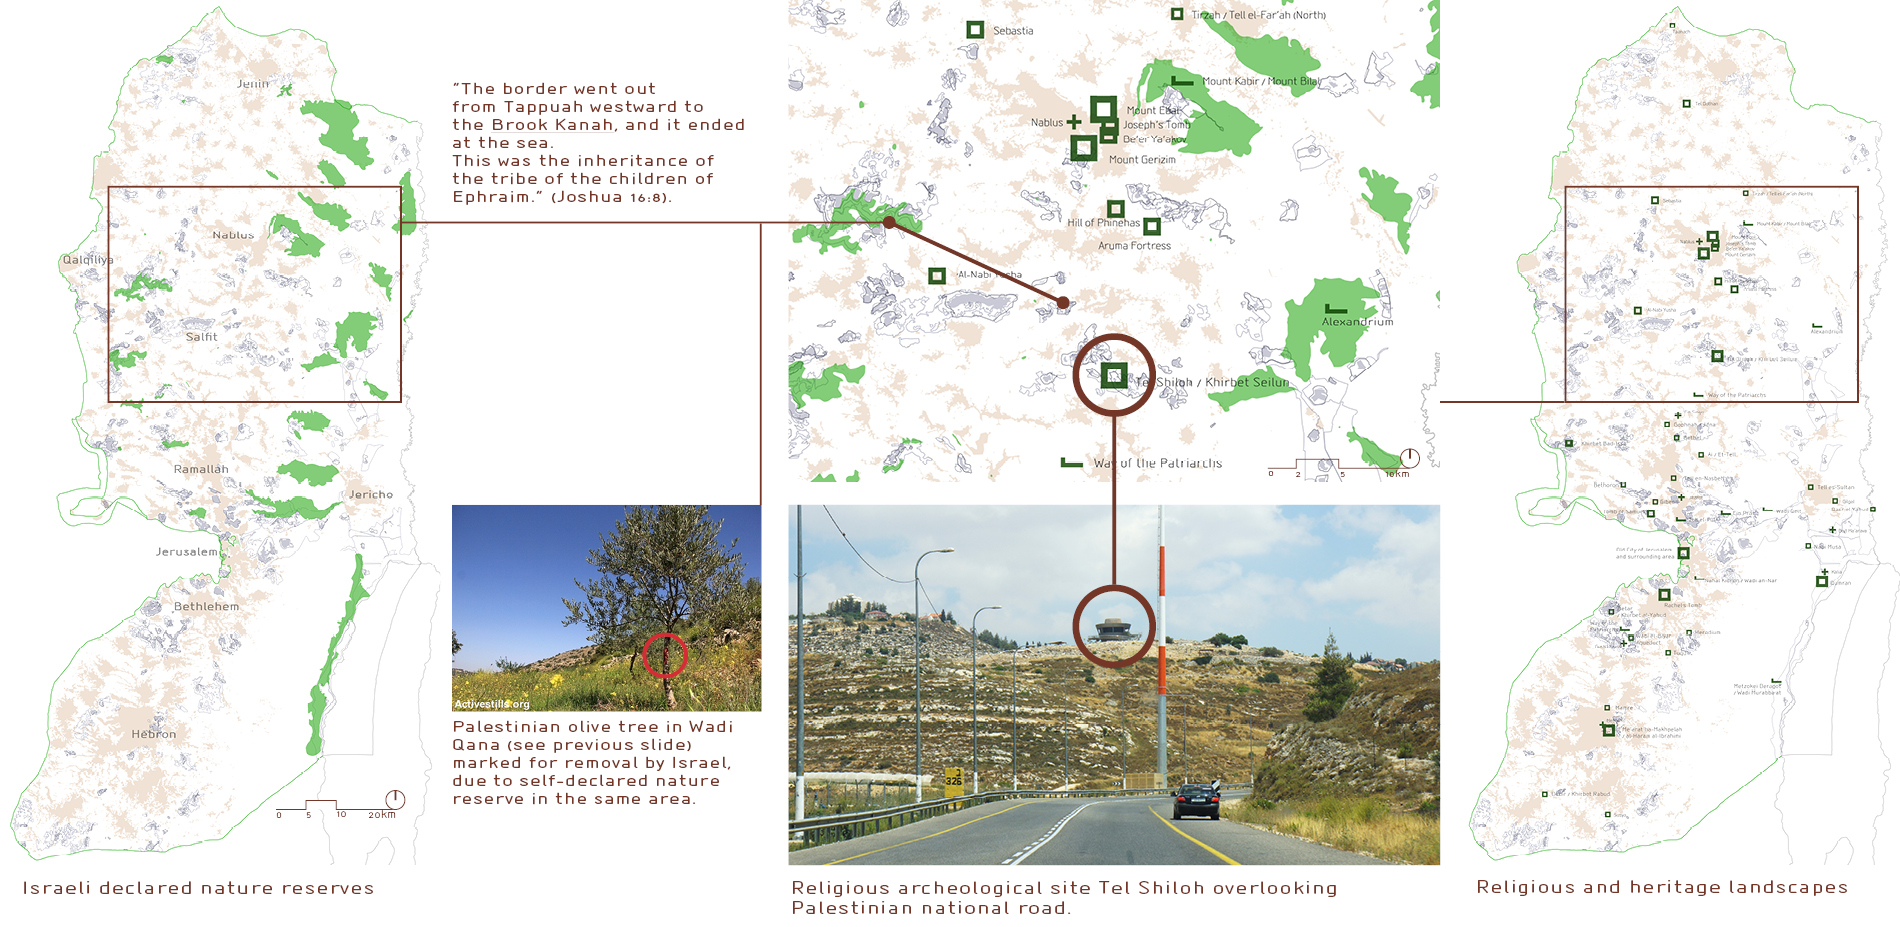 3. Settlement by landscape - example : Wadi Qana  |  3.1. nature reserves acts of declaration  |  3.2. landscape of religion